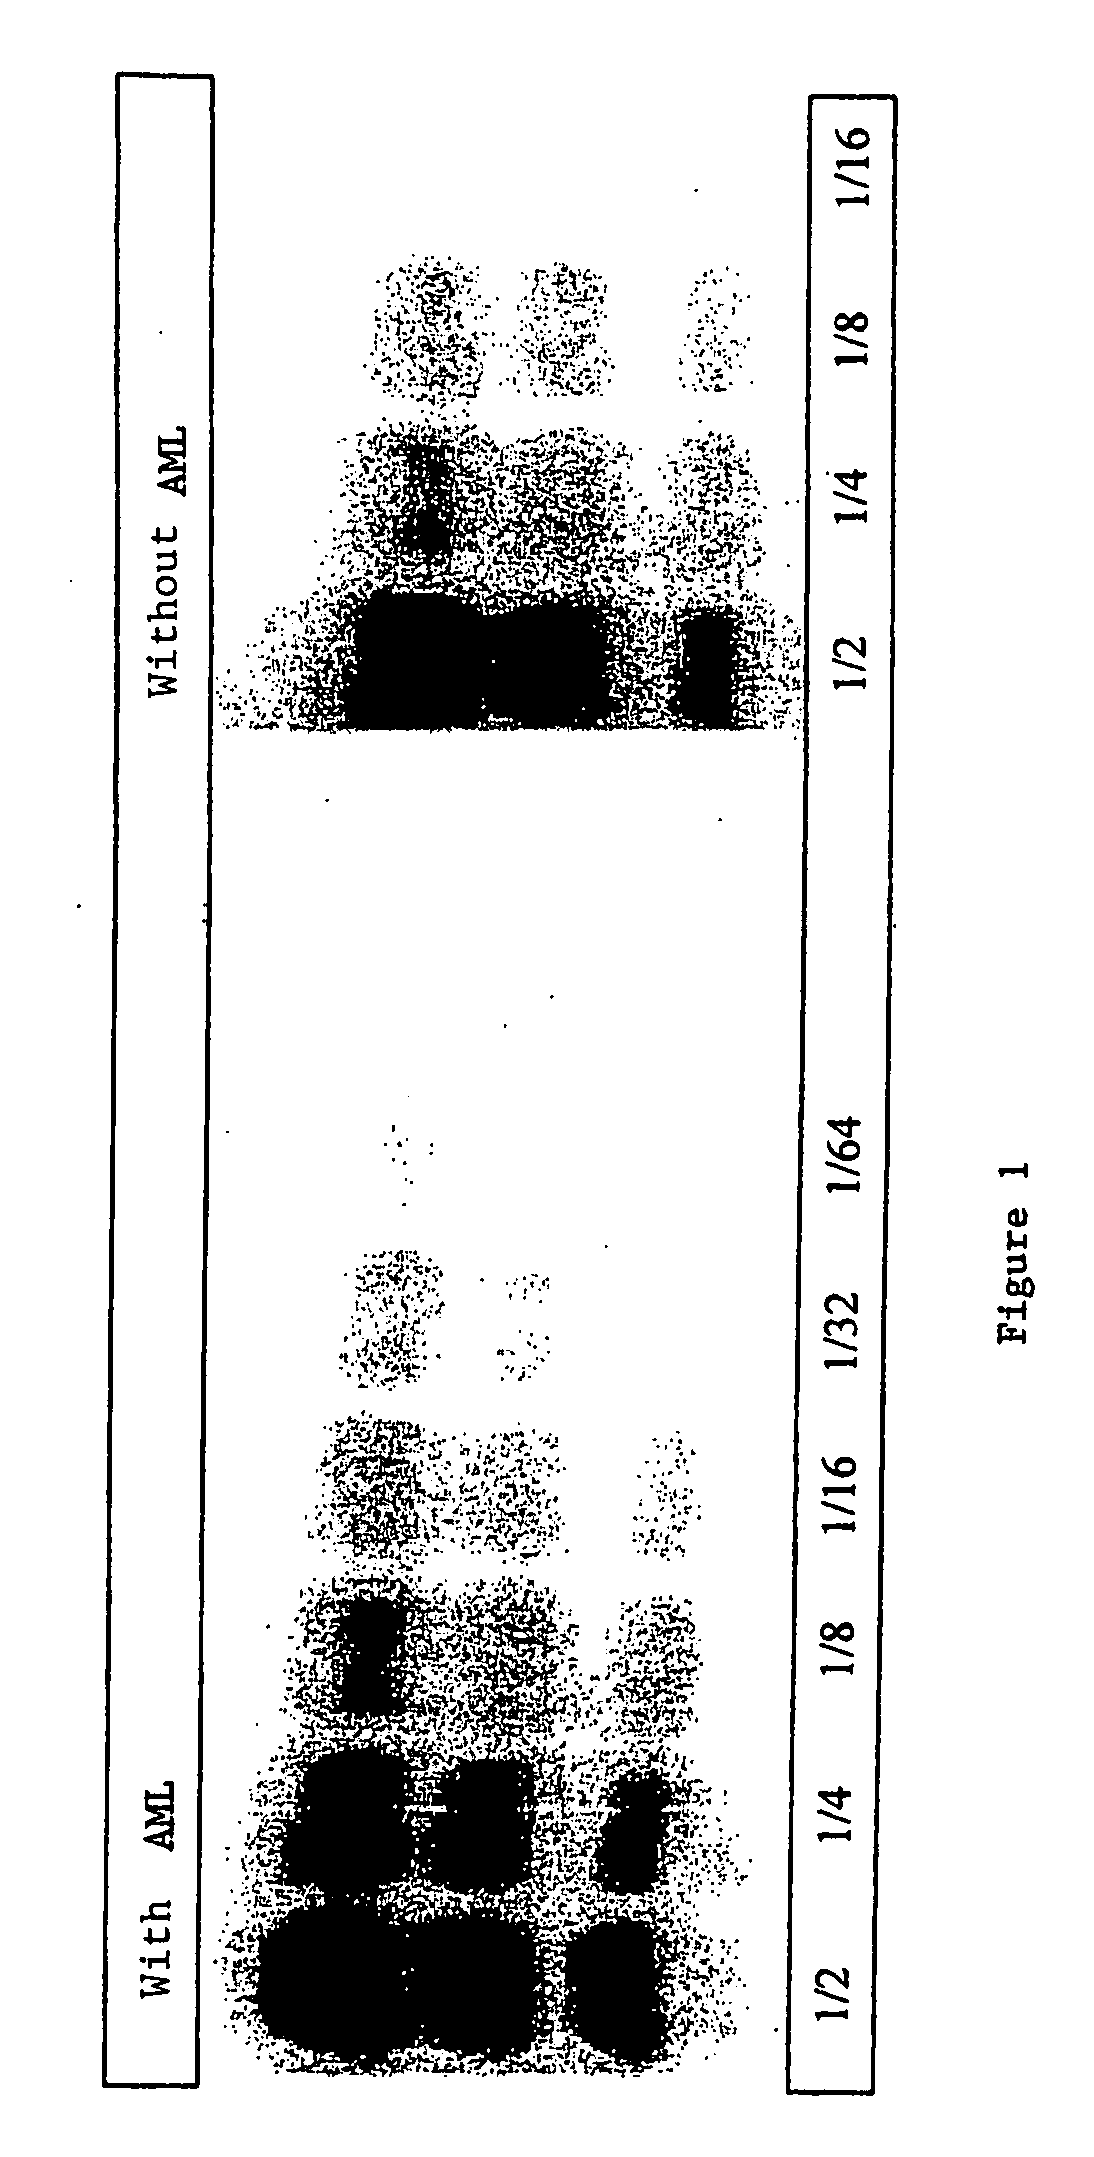 Process for detecting PrP using a macrocyclic adjuvant ligand